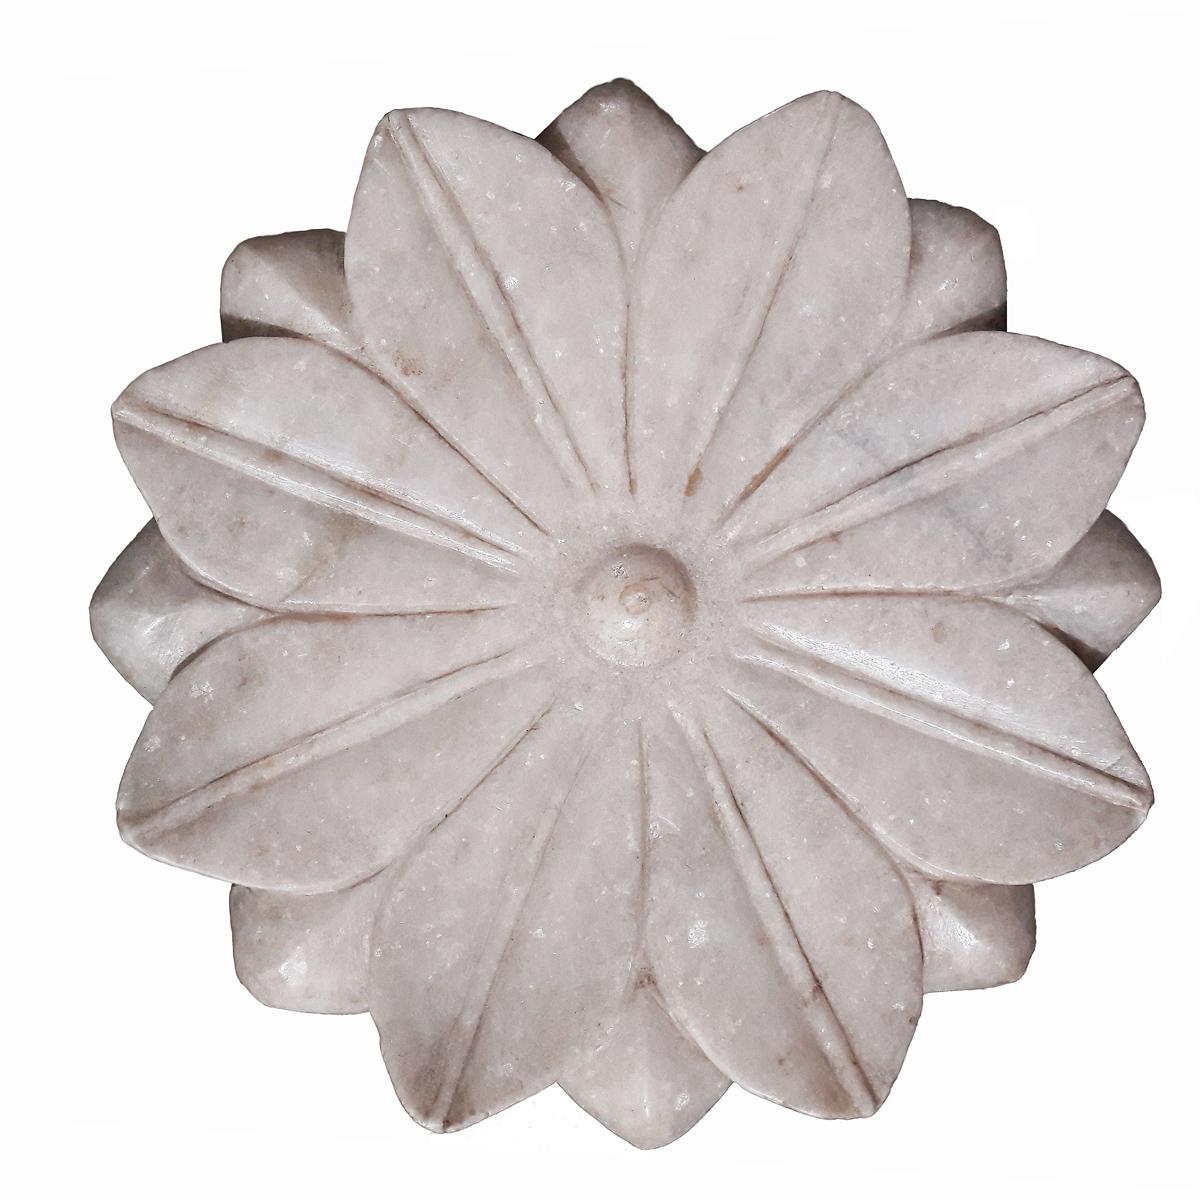 A hand carved marble plate from India, shaped as a Lotus flower, circa 1960.
The natural inclusions in the stone confer this piece a singular iridescent shine. Ideal as an accent for any console, side table, coffee table or any other space where a